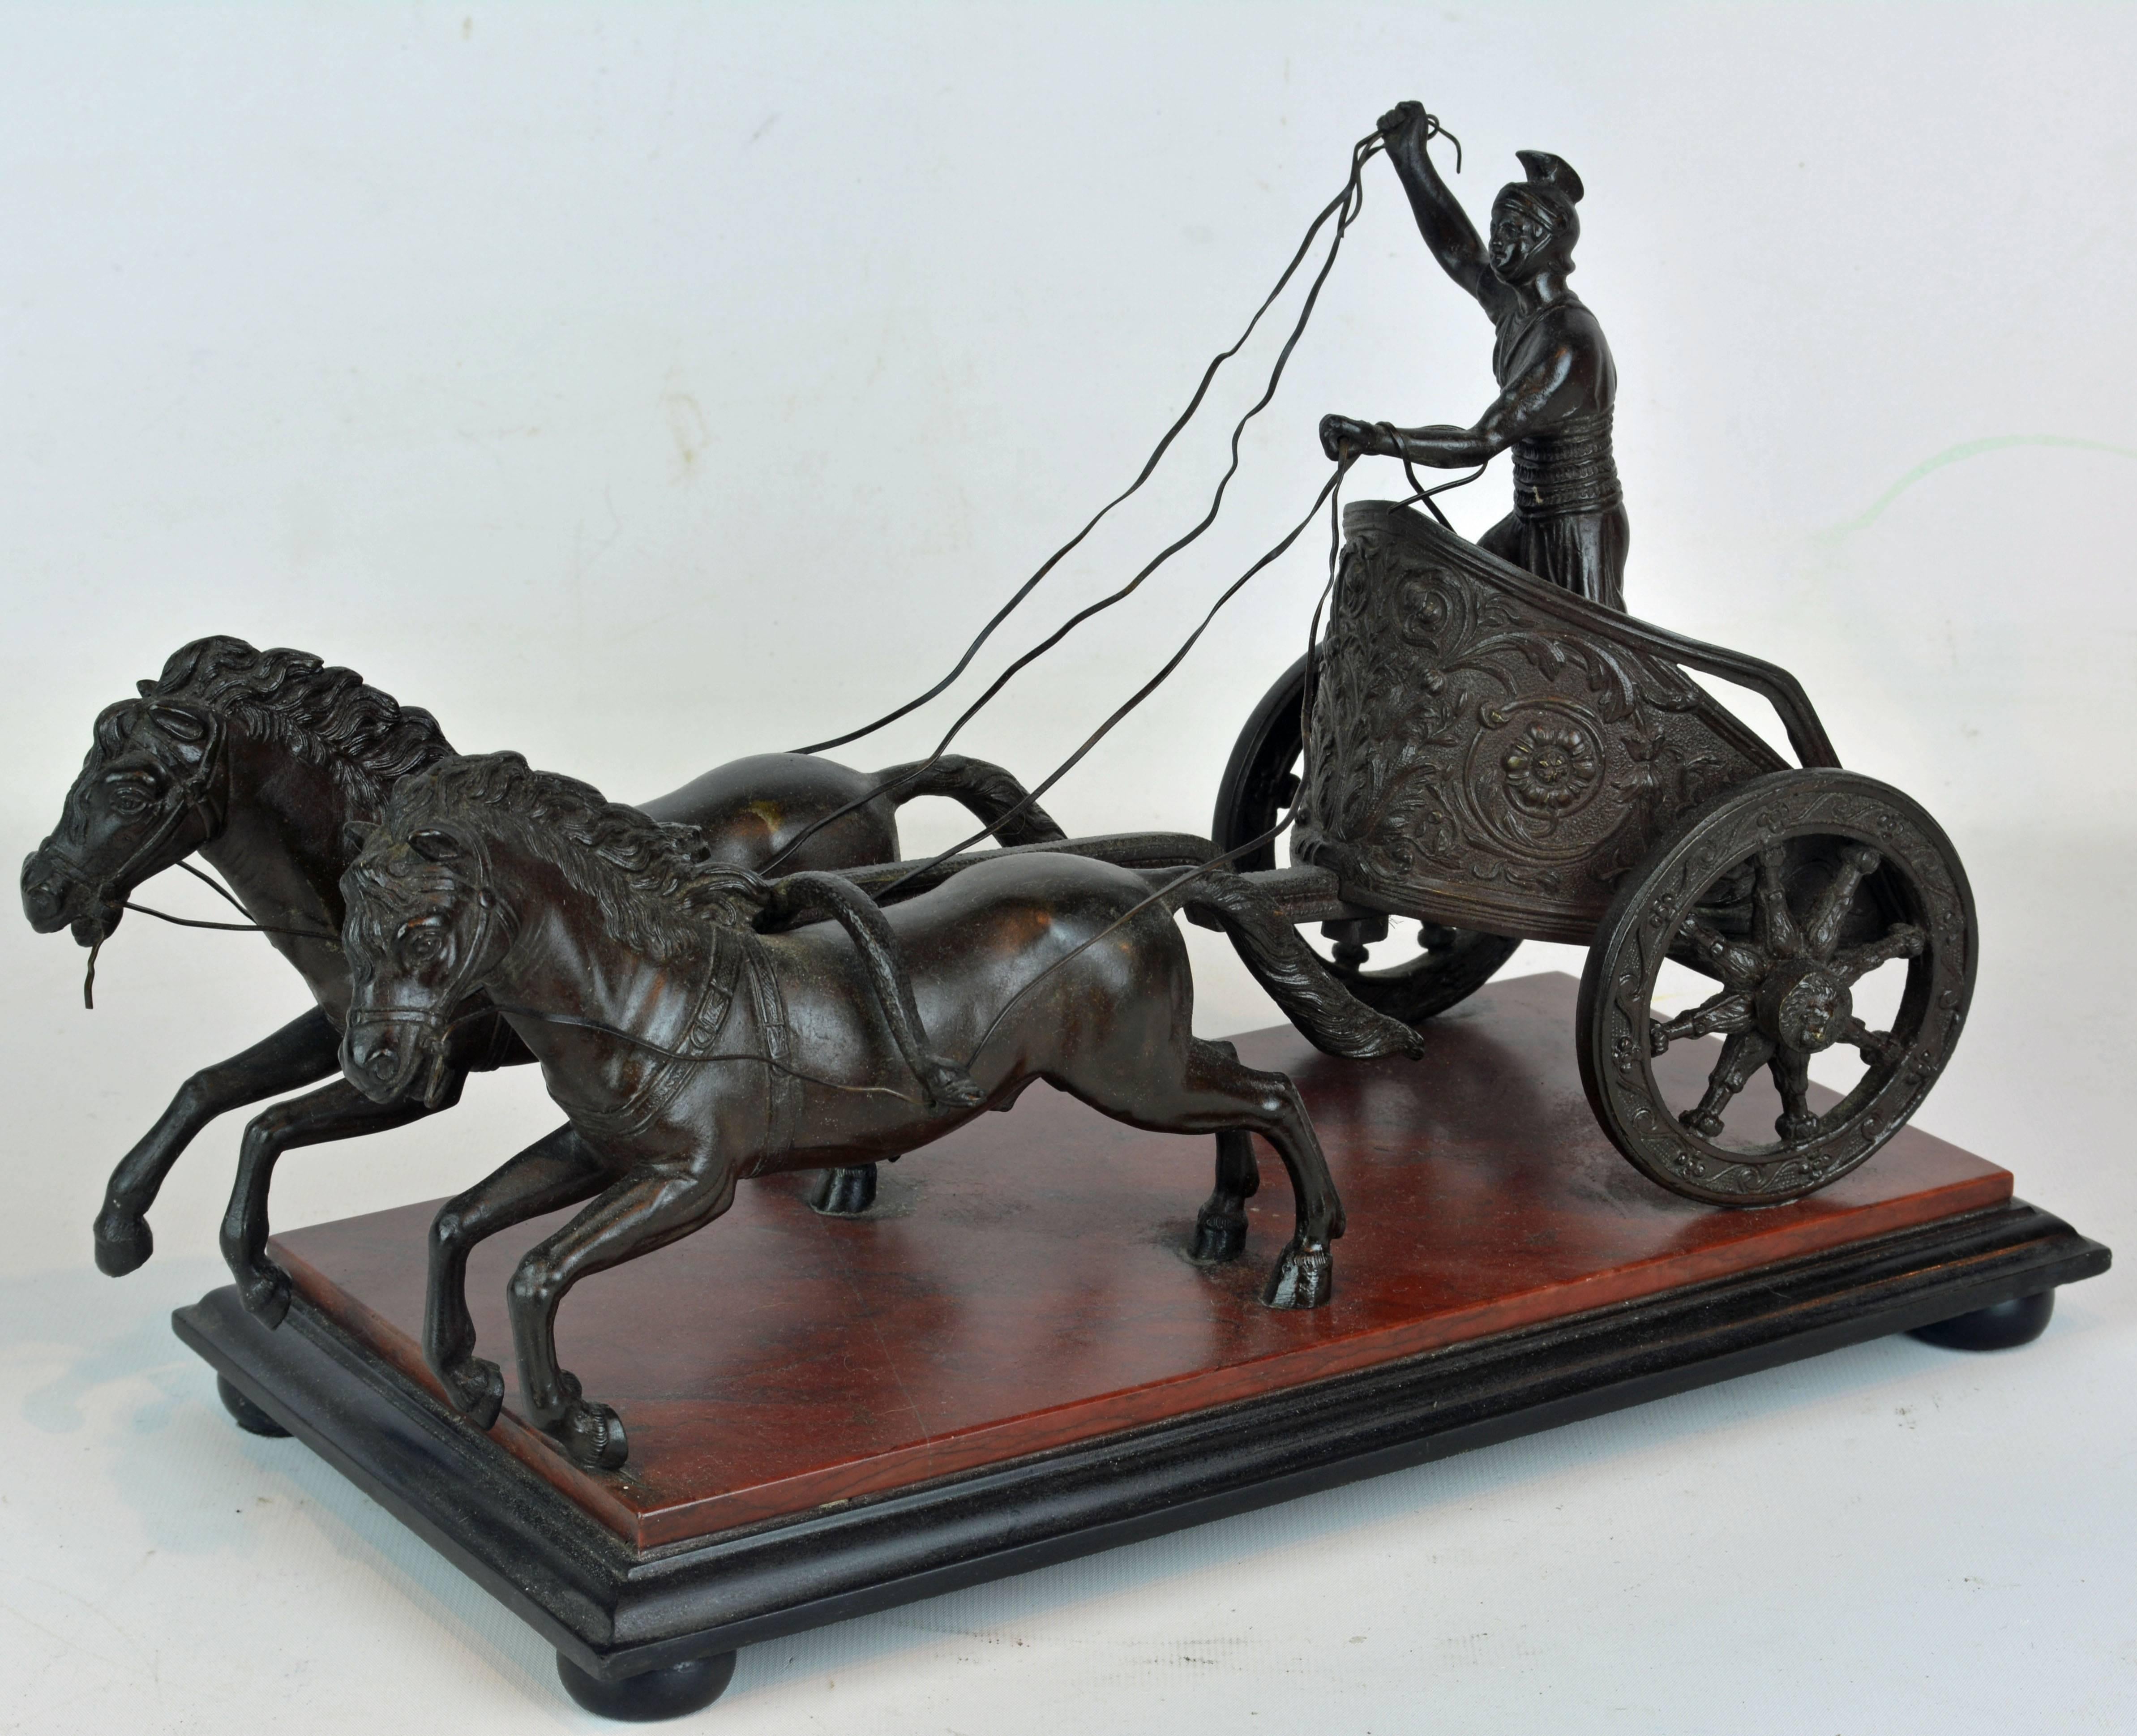 A late 19th century Italian grand tour bronze group representing a Roman charioteer standing in his 'biga' chariot drawn by two horses. The bronze features great detail in as well the surfaces of the chariot as the flowing reins and is mounted on a